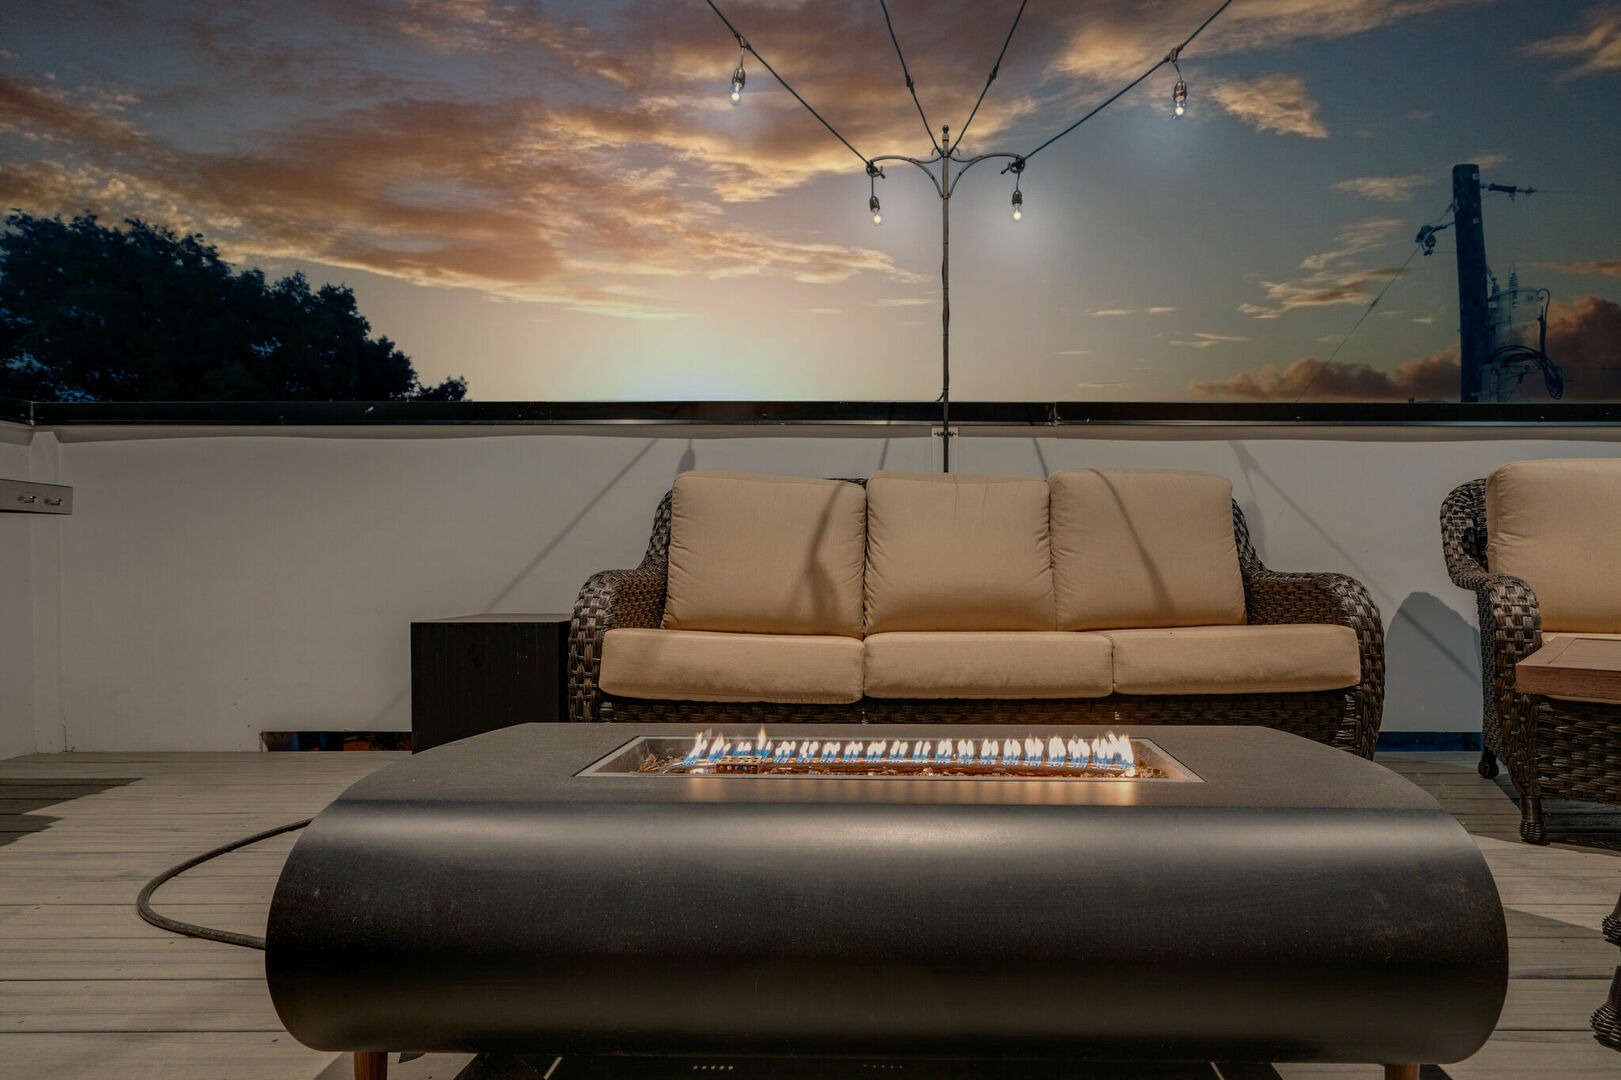 Unit 2: Rooftop balcony with outdoor BBQ, smart TV, fire pit, lounge area, and bistro lights.